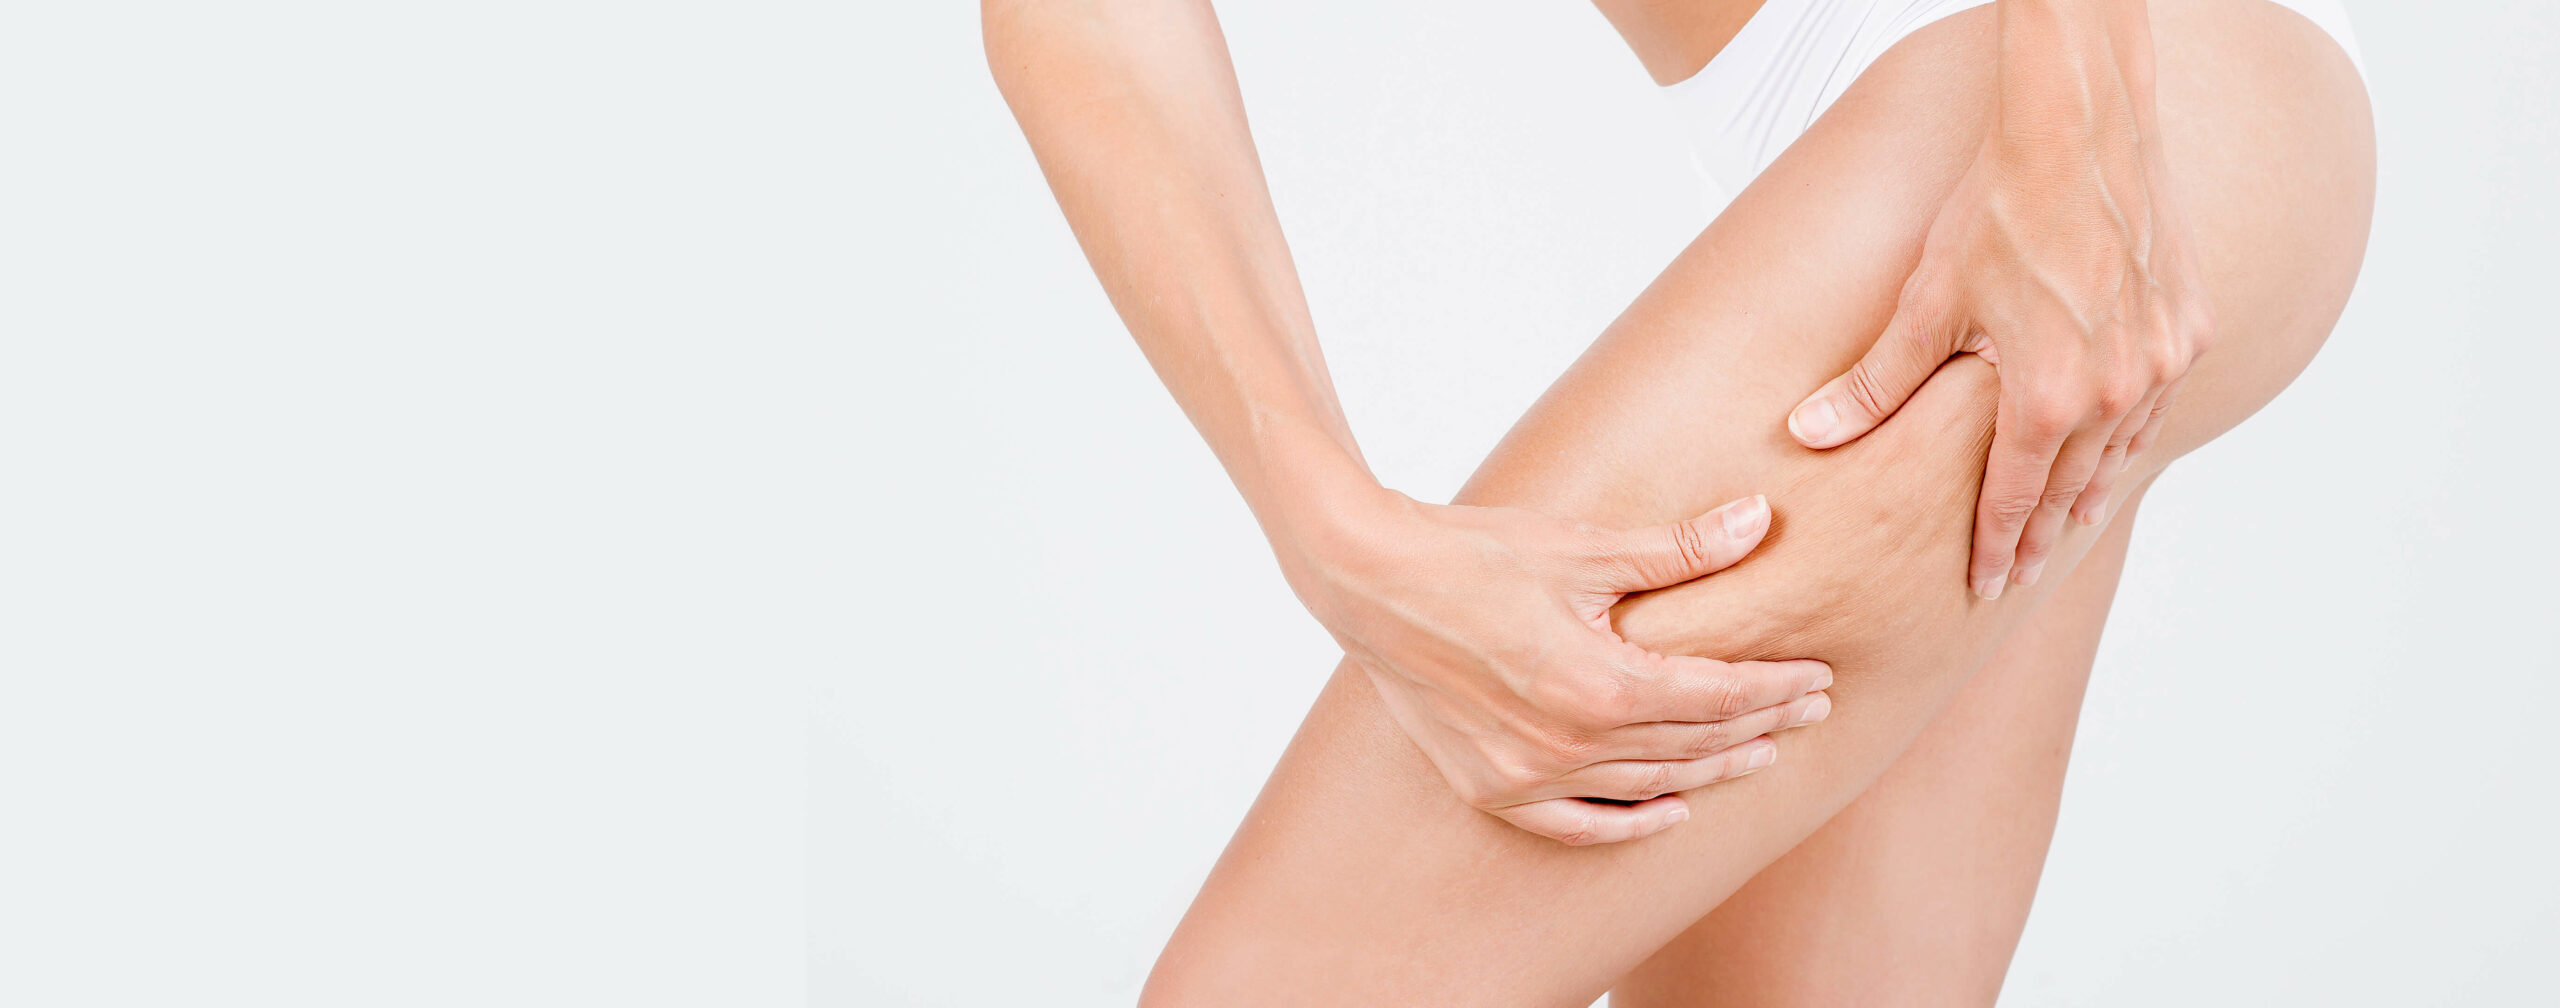 The Latest Innovations in Cellulite Treatments - PureMD